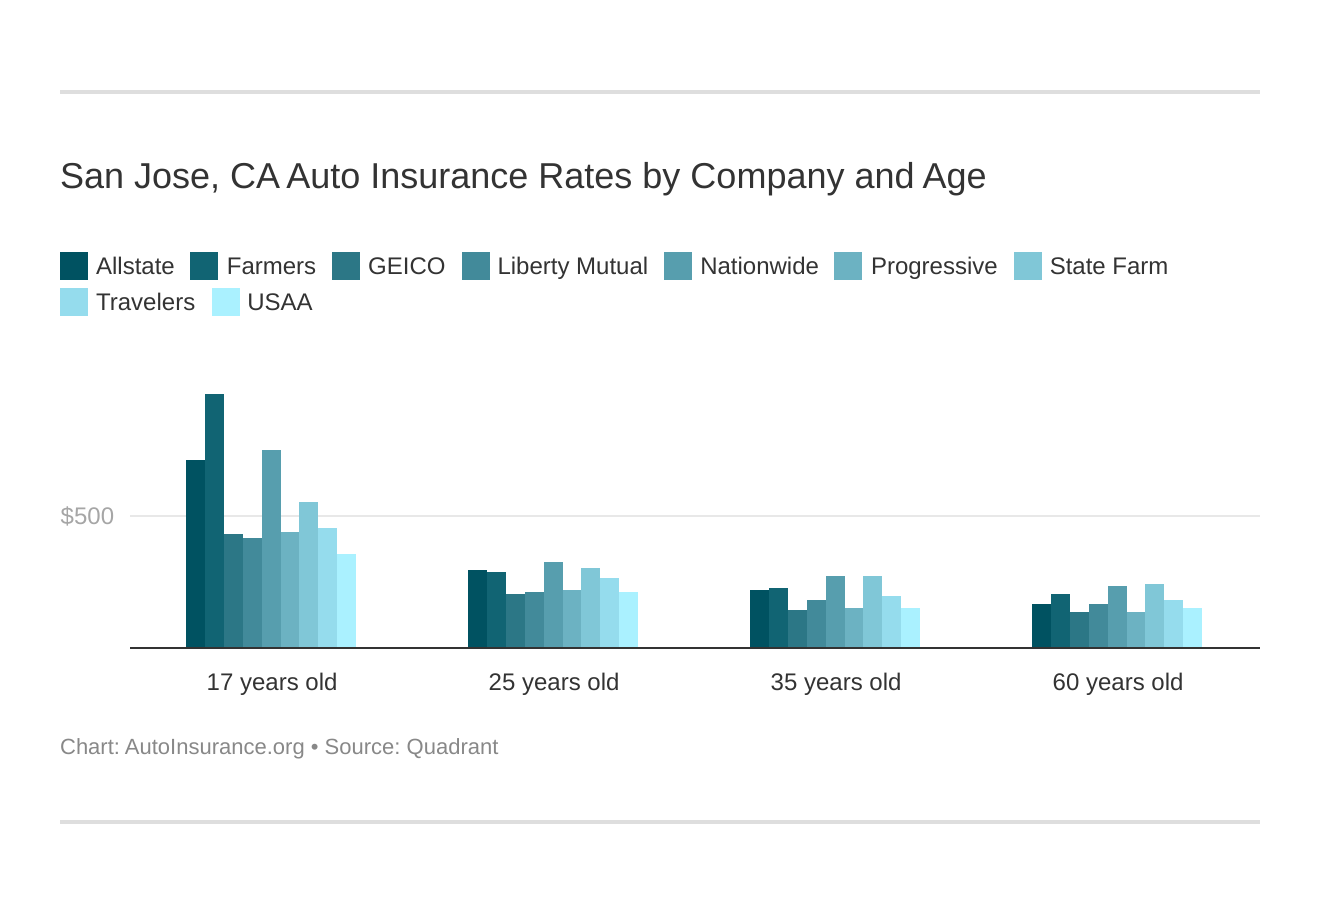 San Jose, CA Auto Insurance Rates by Company and Age